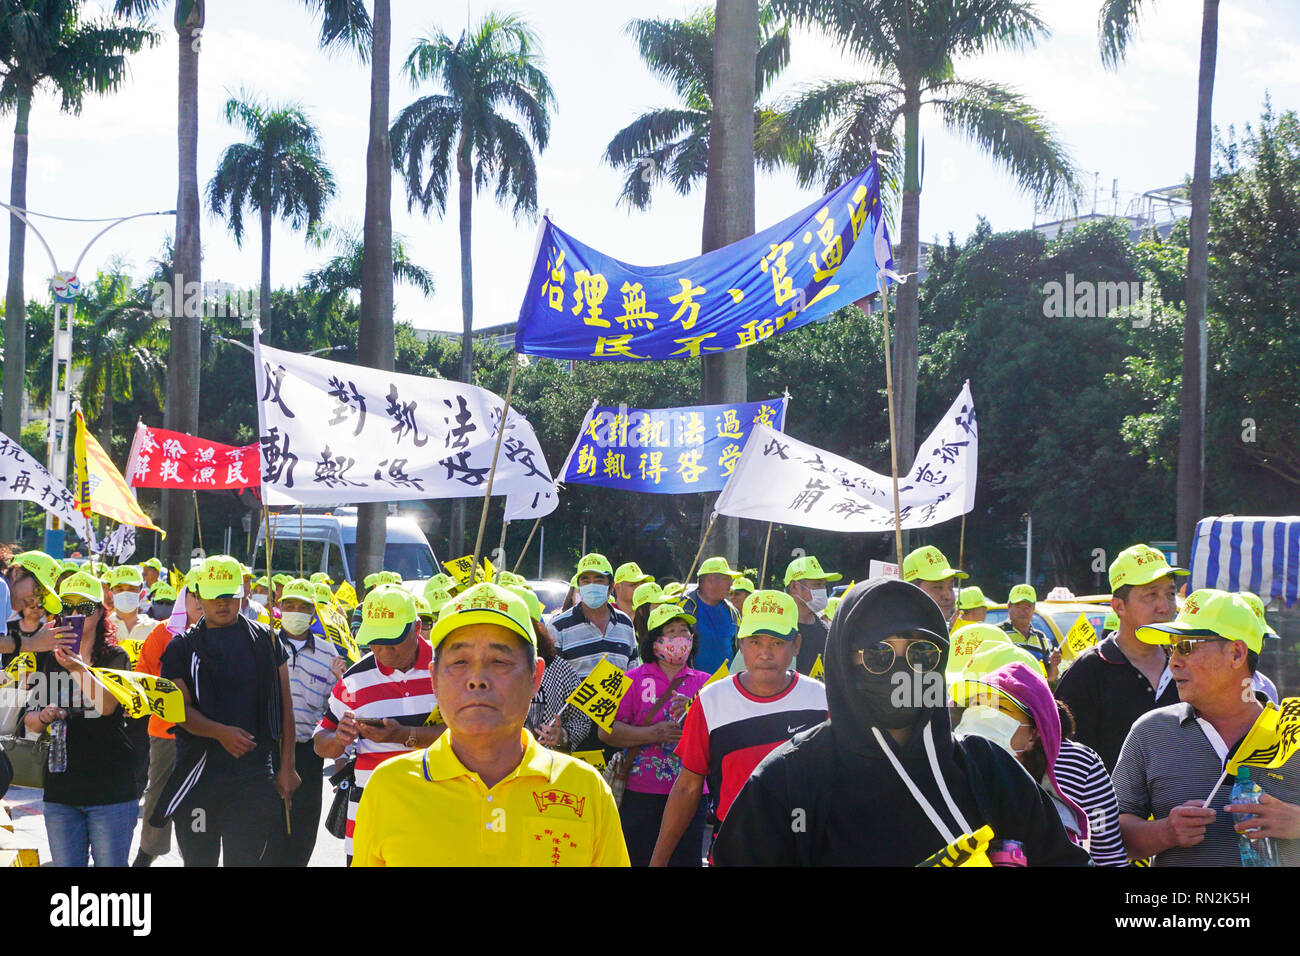 Fishermen's organization protesting government policy in Taipei, Taiwan, Demonstration Stock Photo